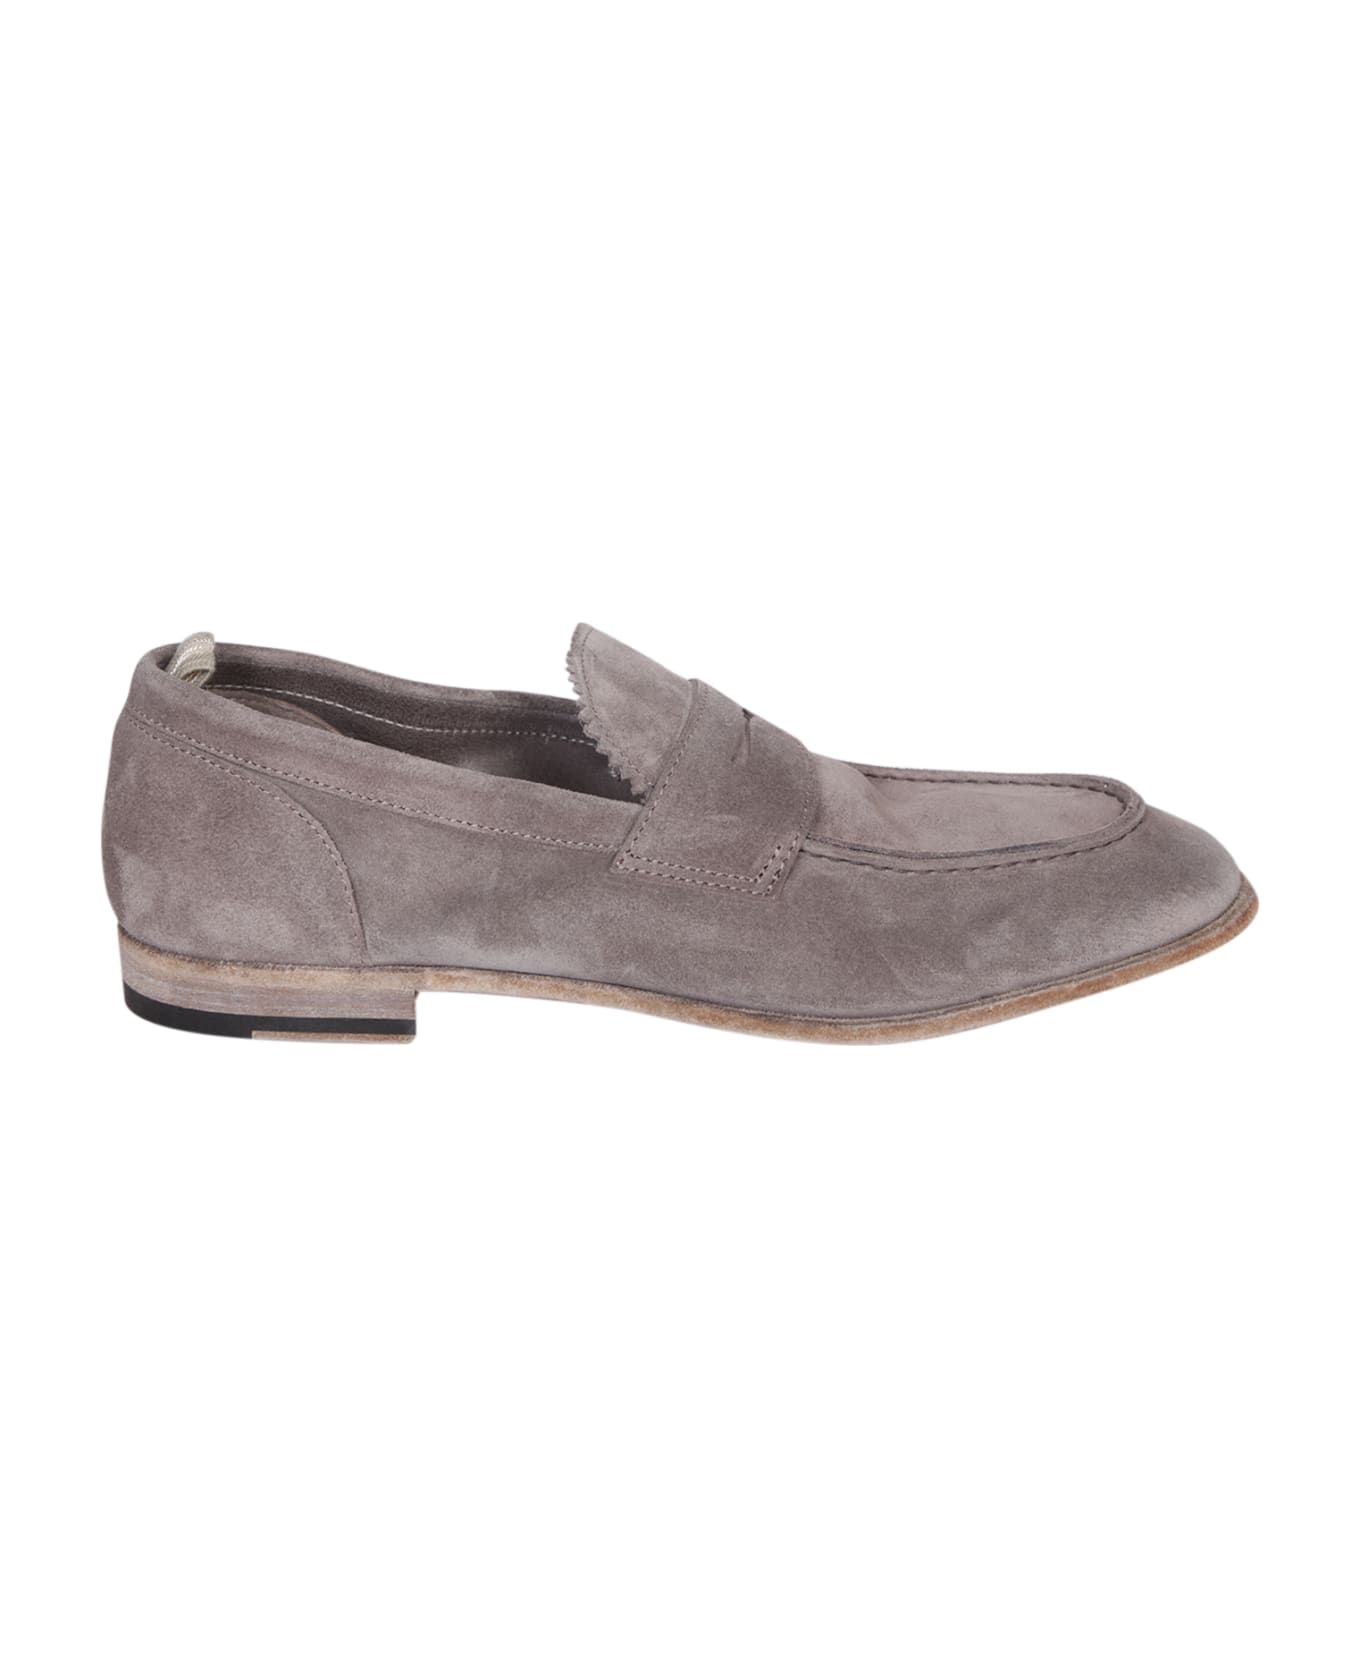 Officine Creative Solitude 001 Suede Taupe Loafer - Grey ローファー＆デッキシューズ